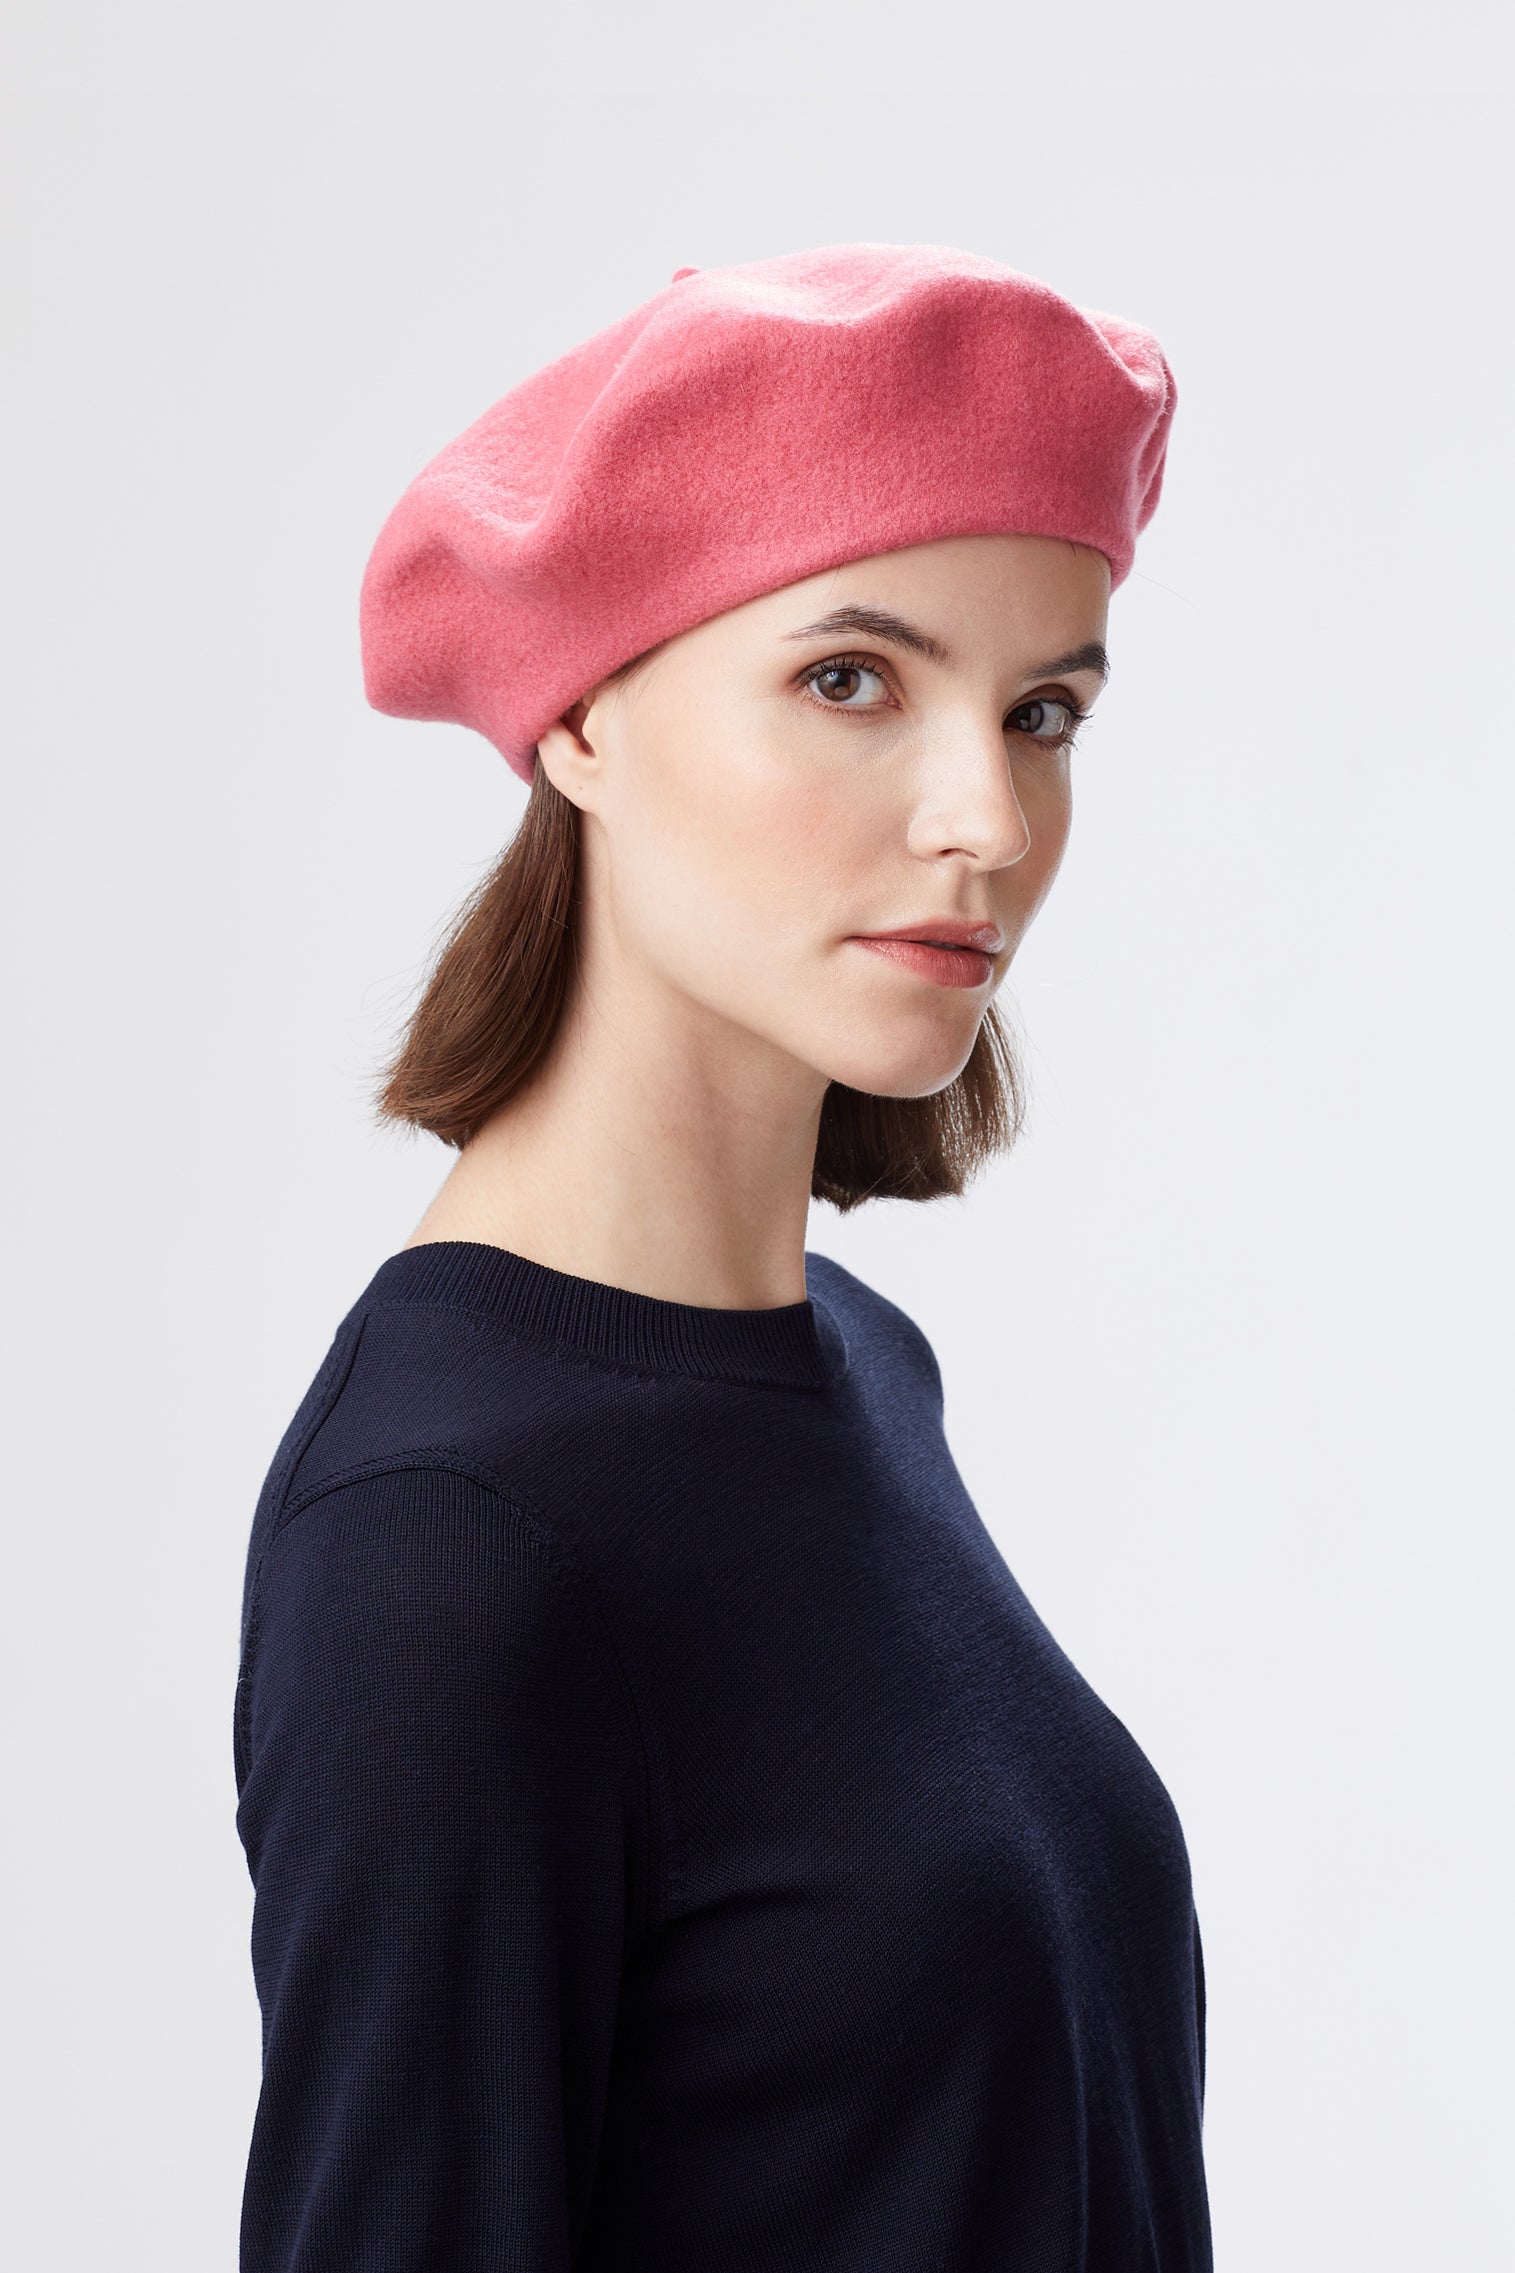 French Beret - Hats for Oval Face Shapes - Lock & Co. Hatters London UK